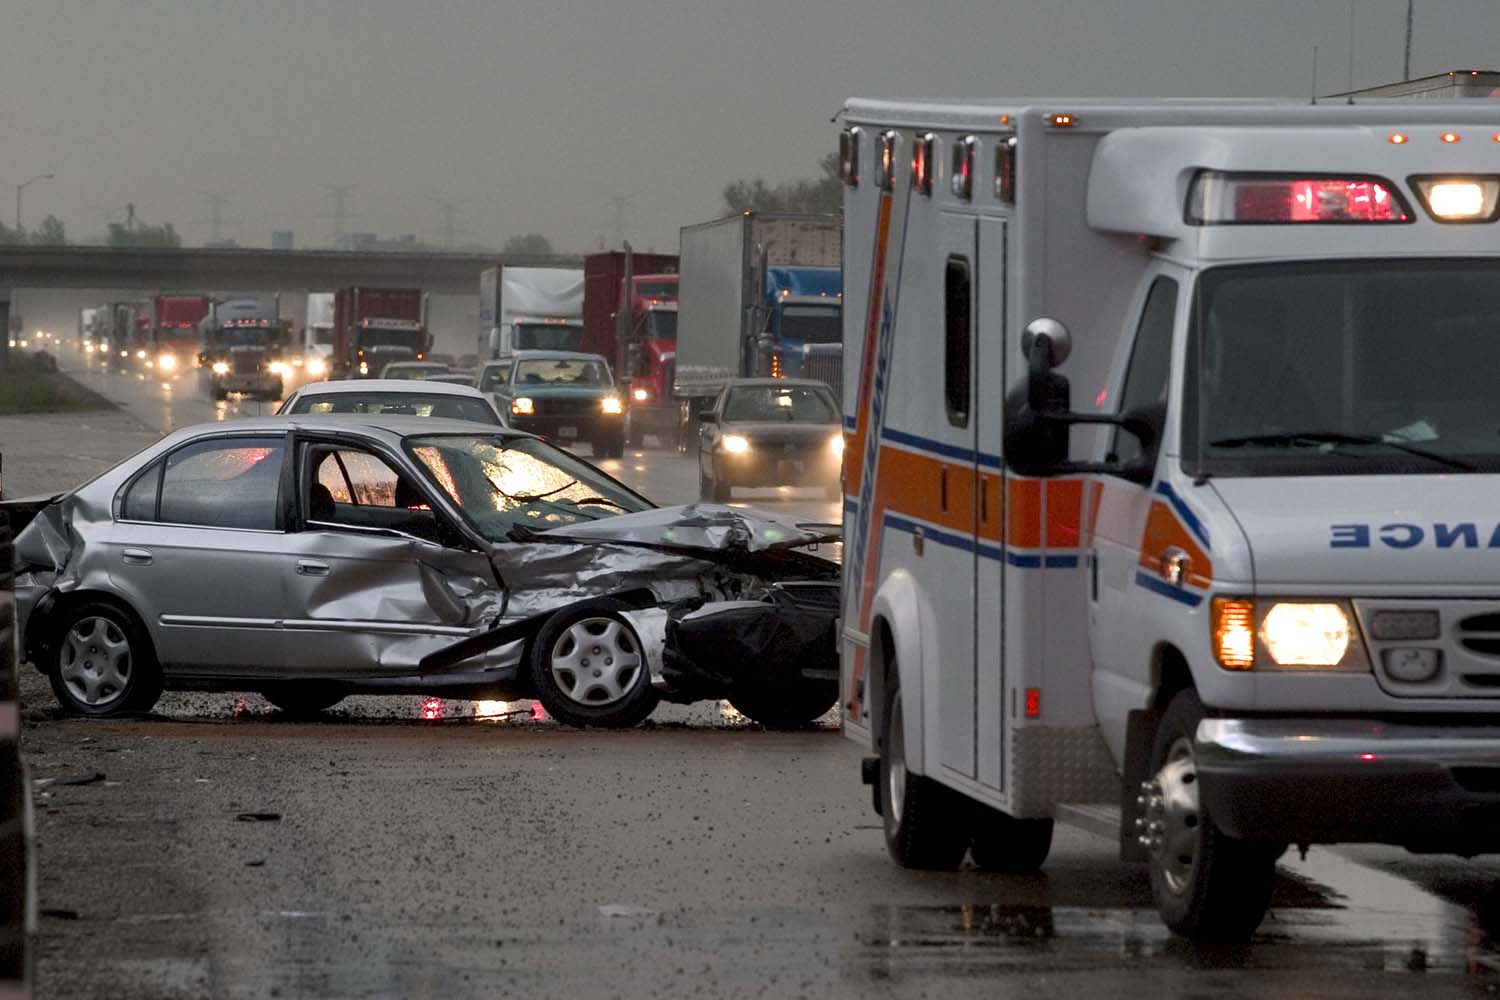 7 Essential Things to Do After Being in a Car Accident